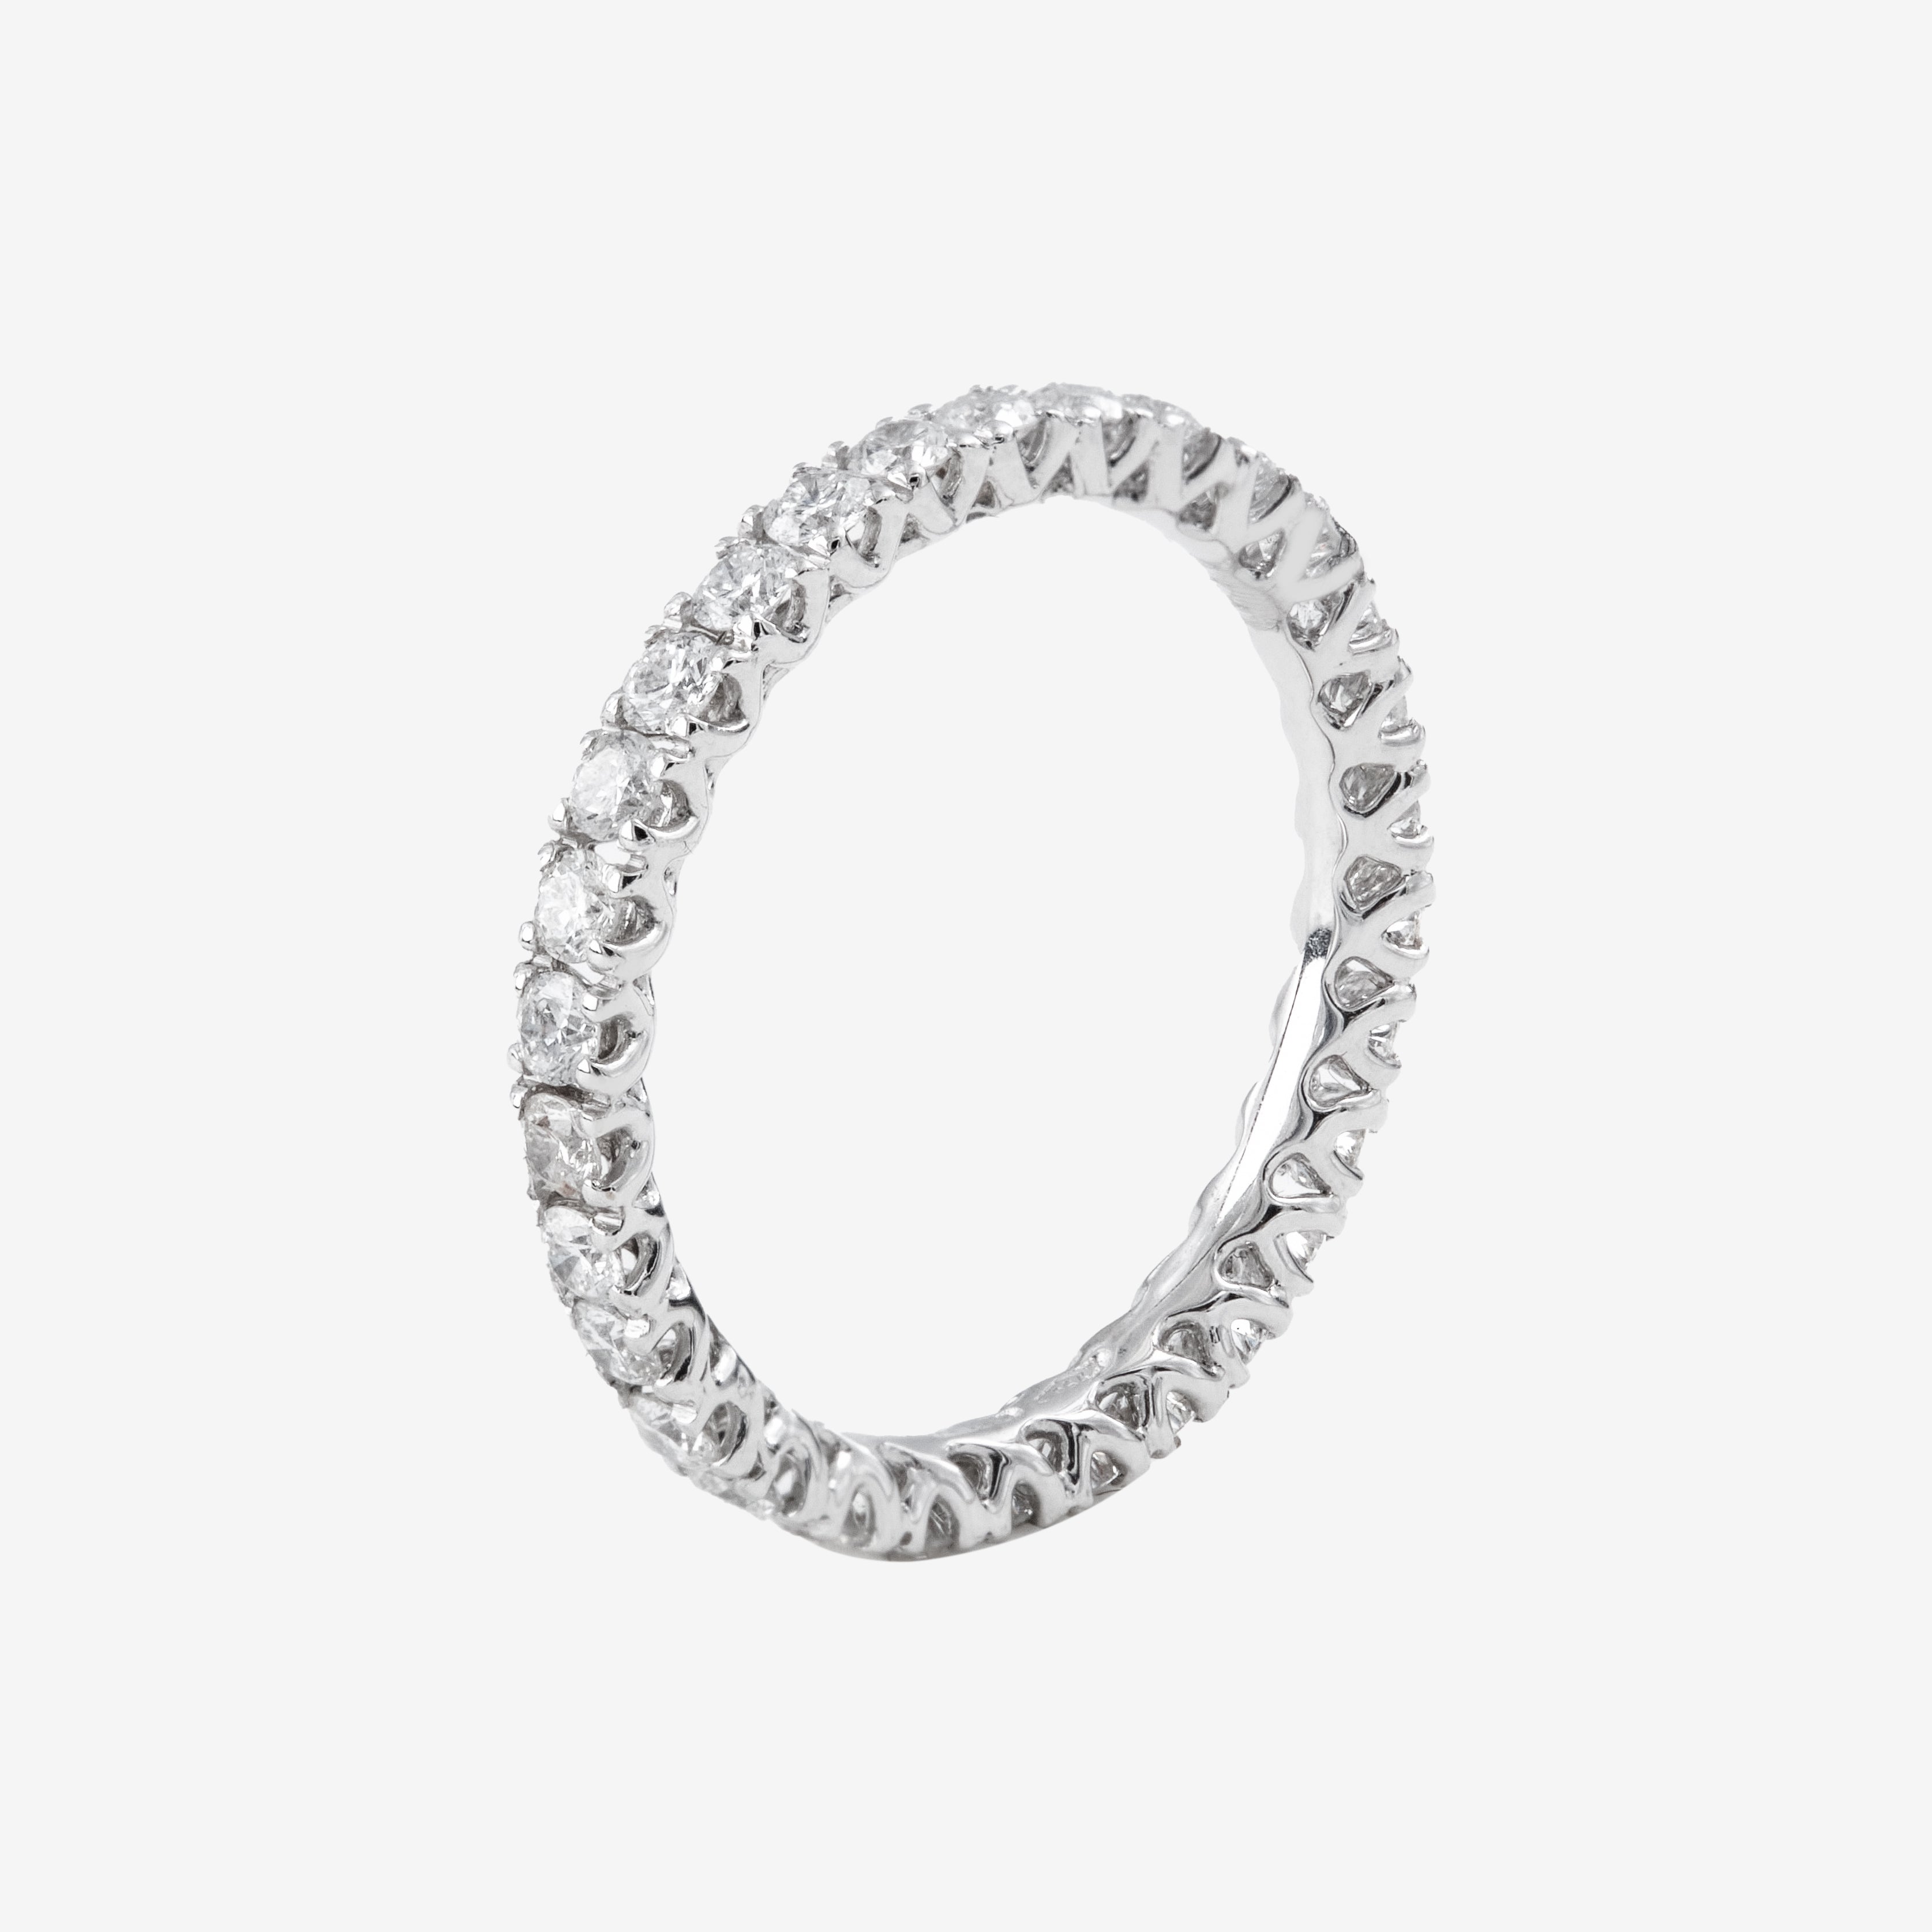 White Gold Eternity Ring with White Diamonds 0.7ct